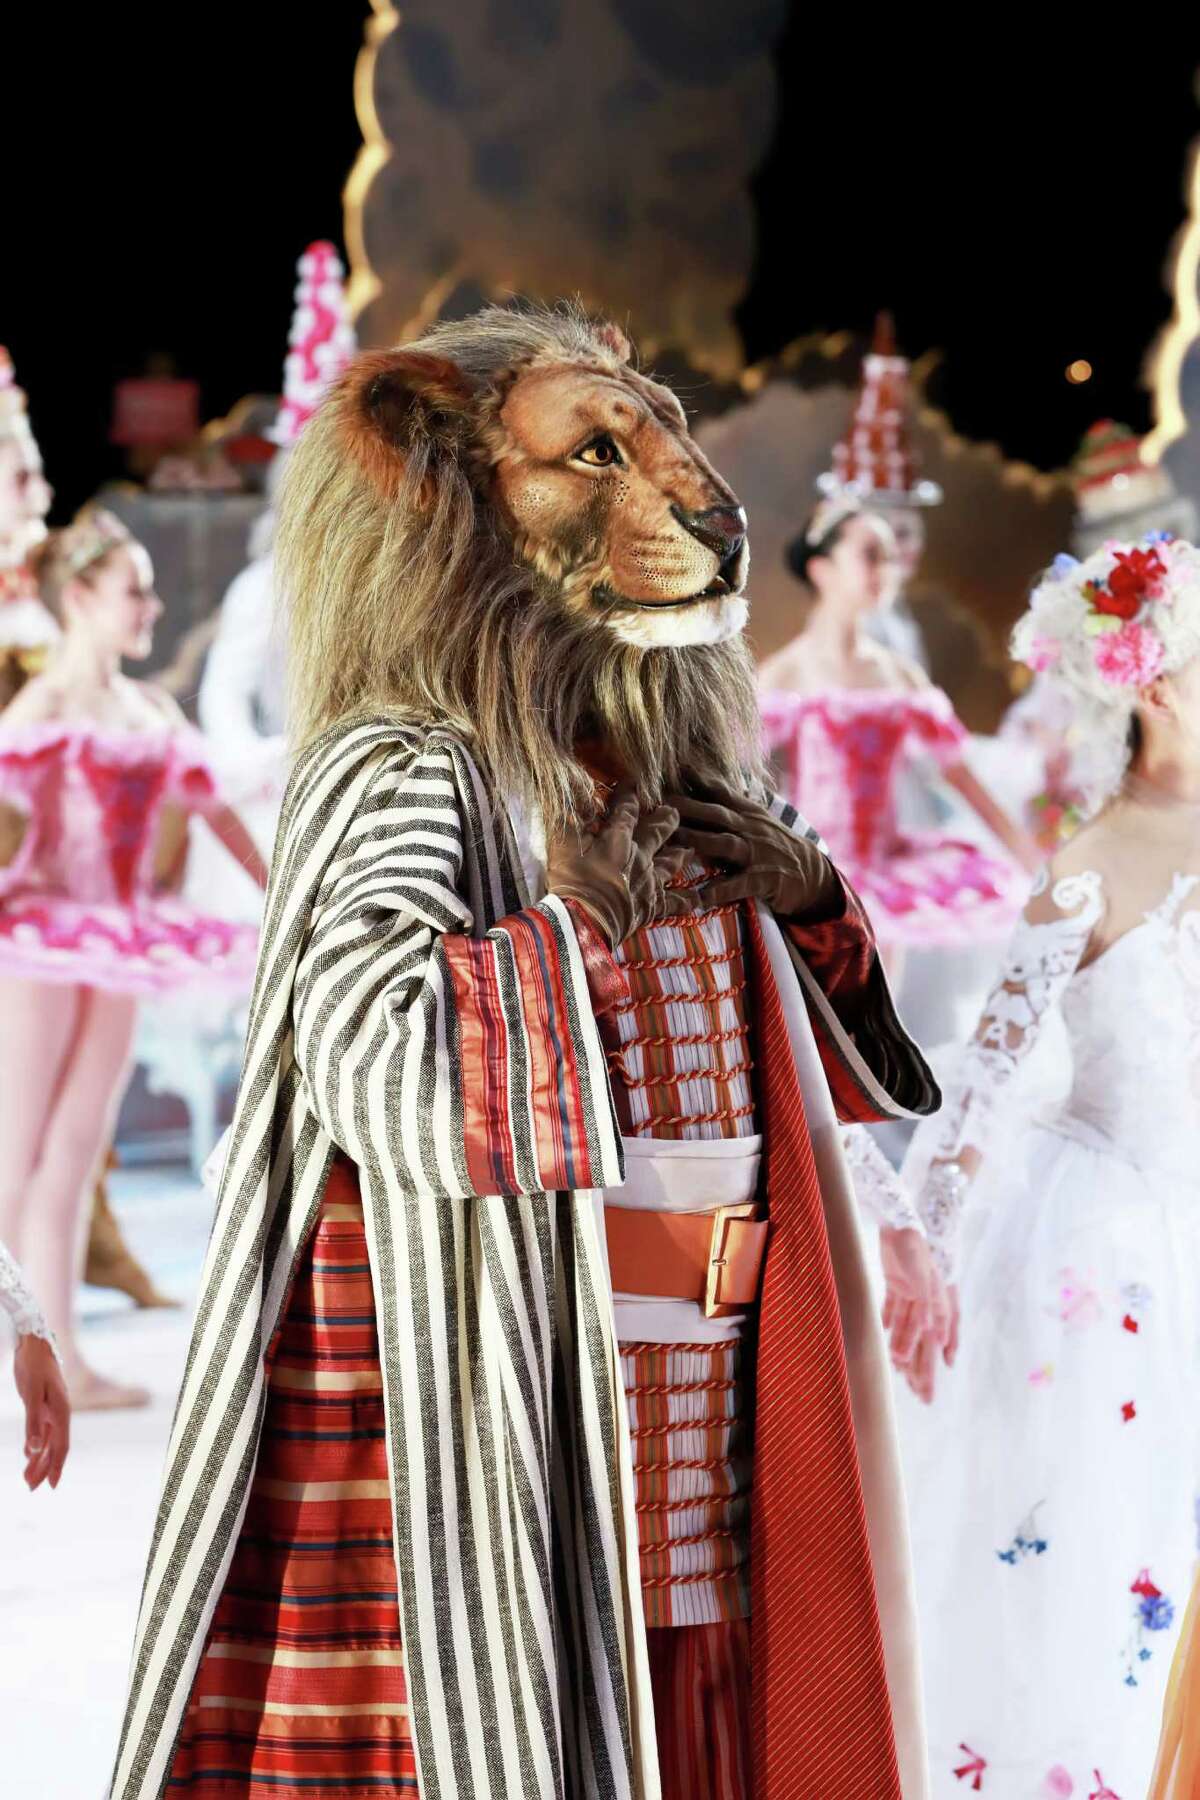 Houston Ballet's production of Stanton Welch's new "Nutcracker" features amazing sets and costumes by Tim Goodchild, including the Arabian Ambassador, ﻿﻿a gorgeously outfitted lion. ﻿﻿﻿﻿